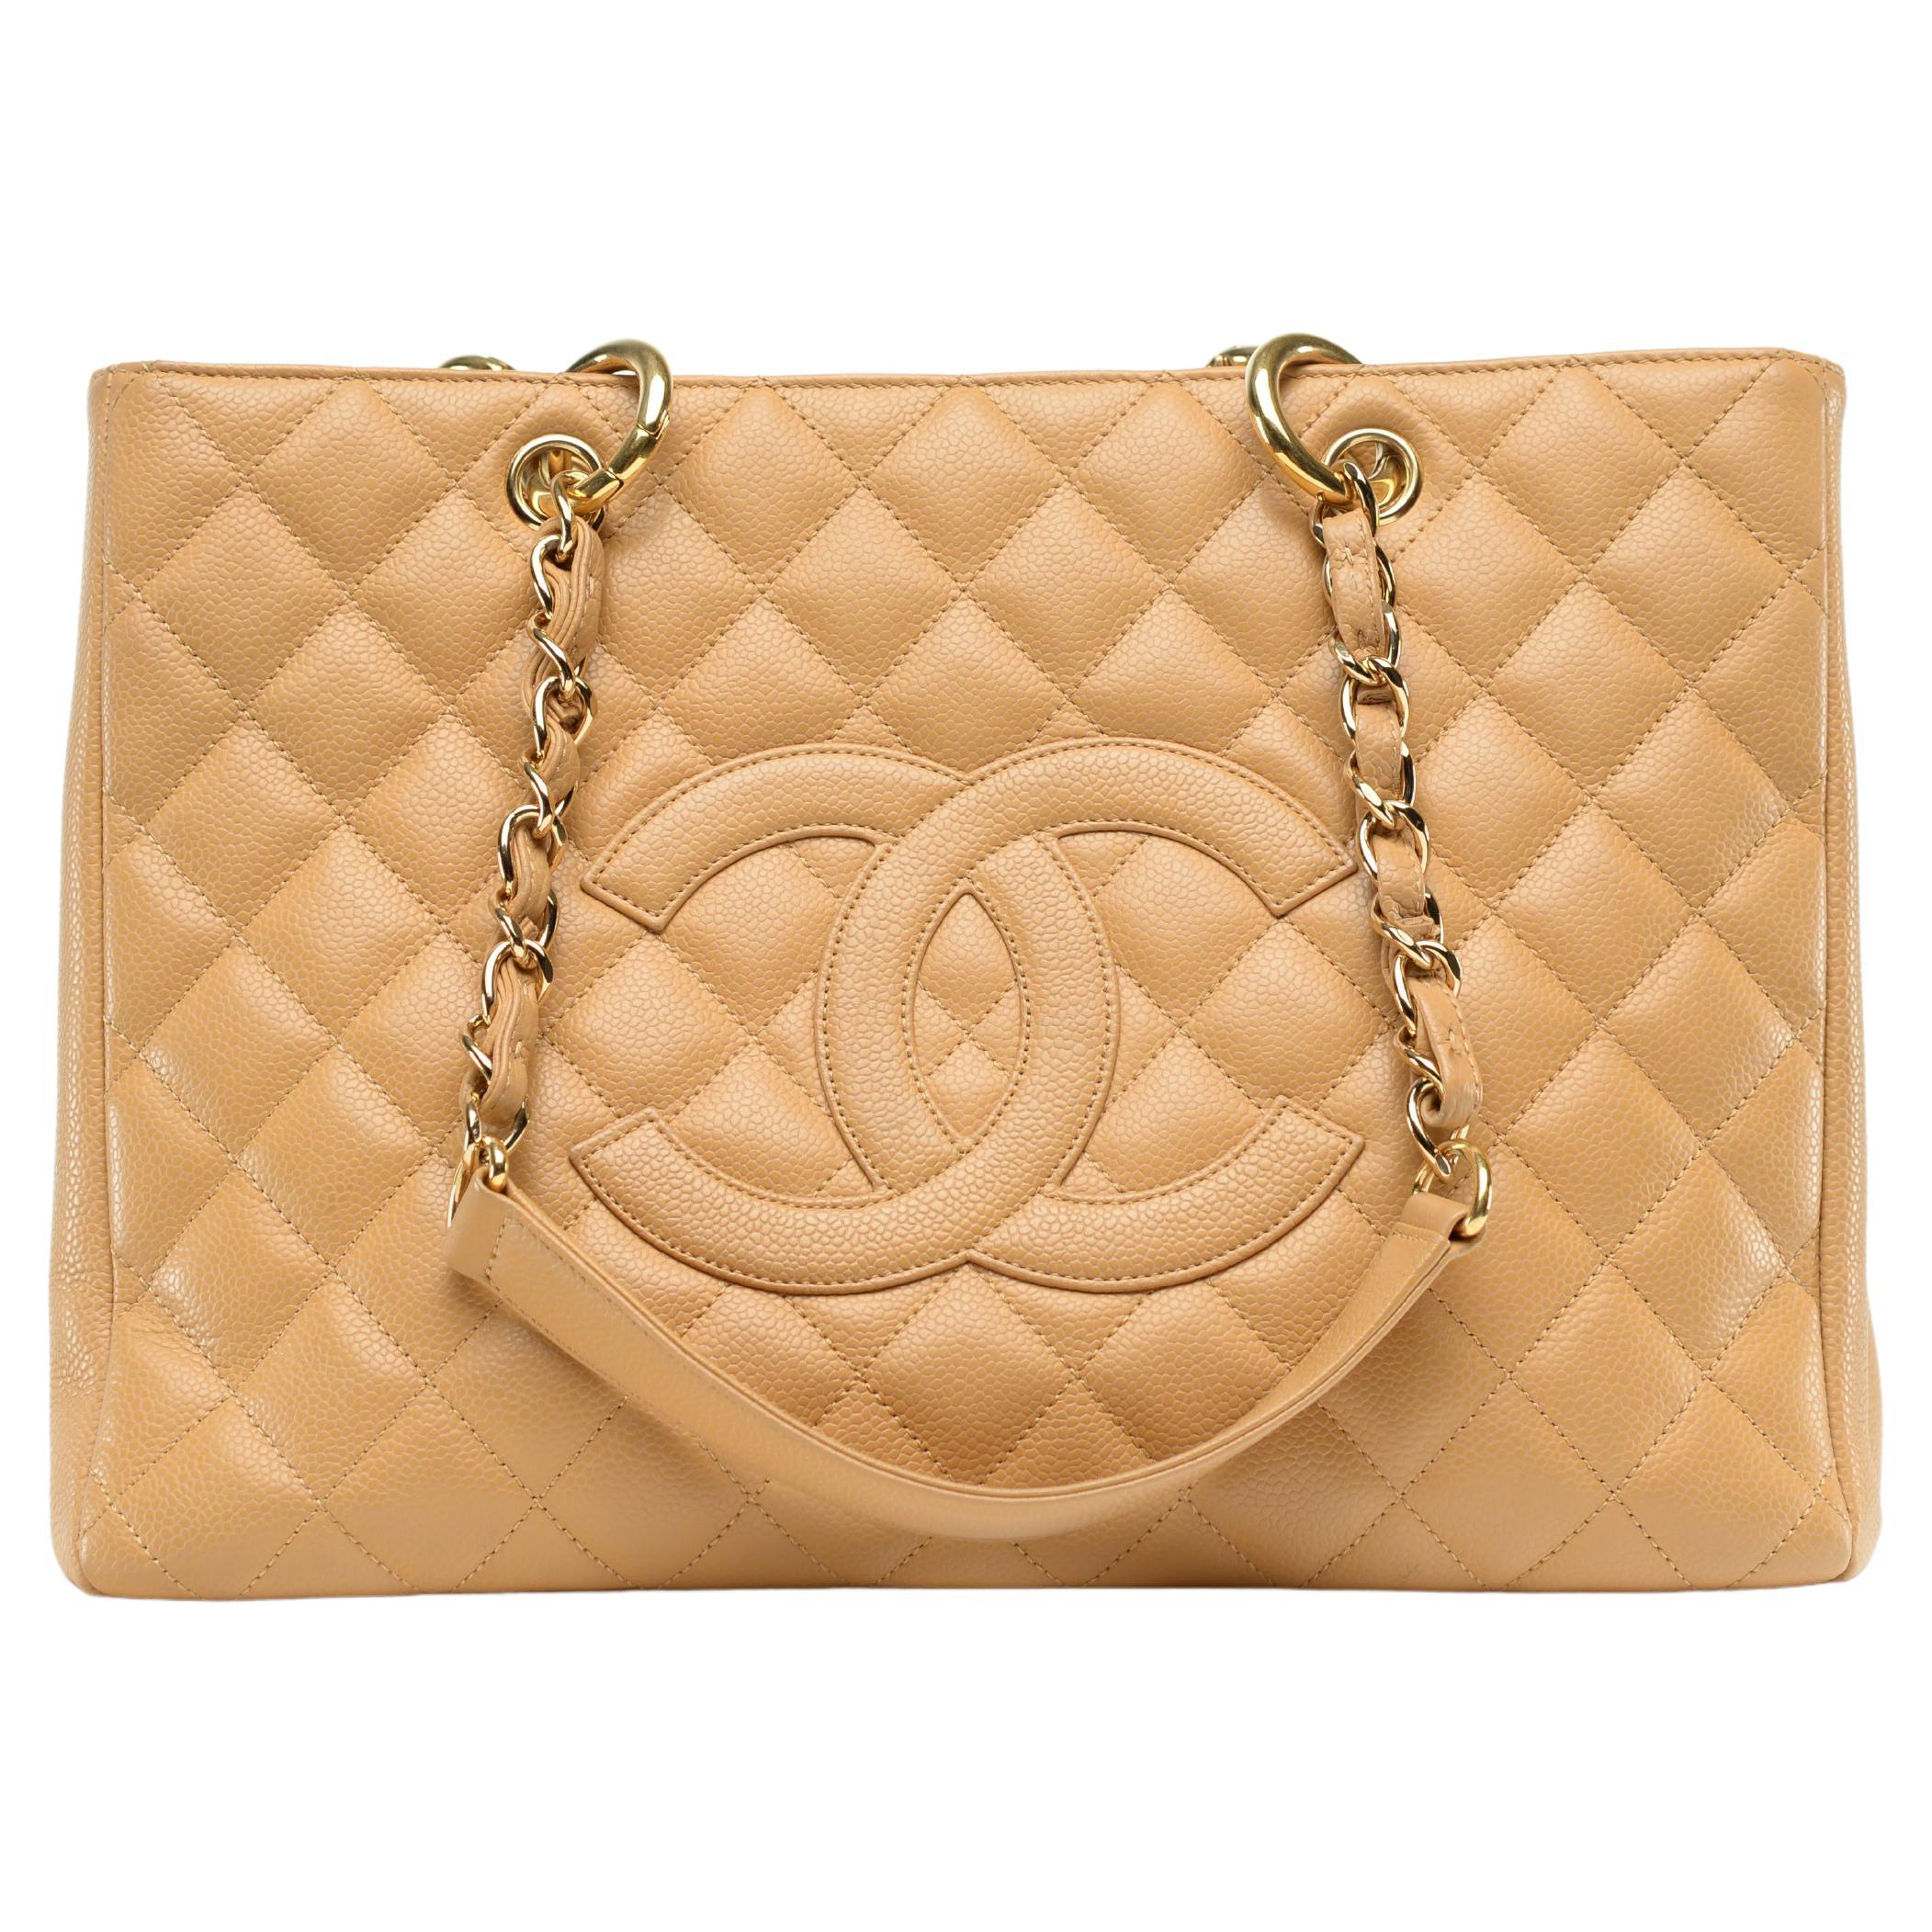 chanel beige small bag